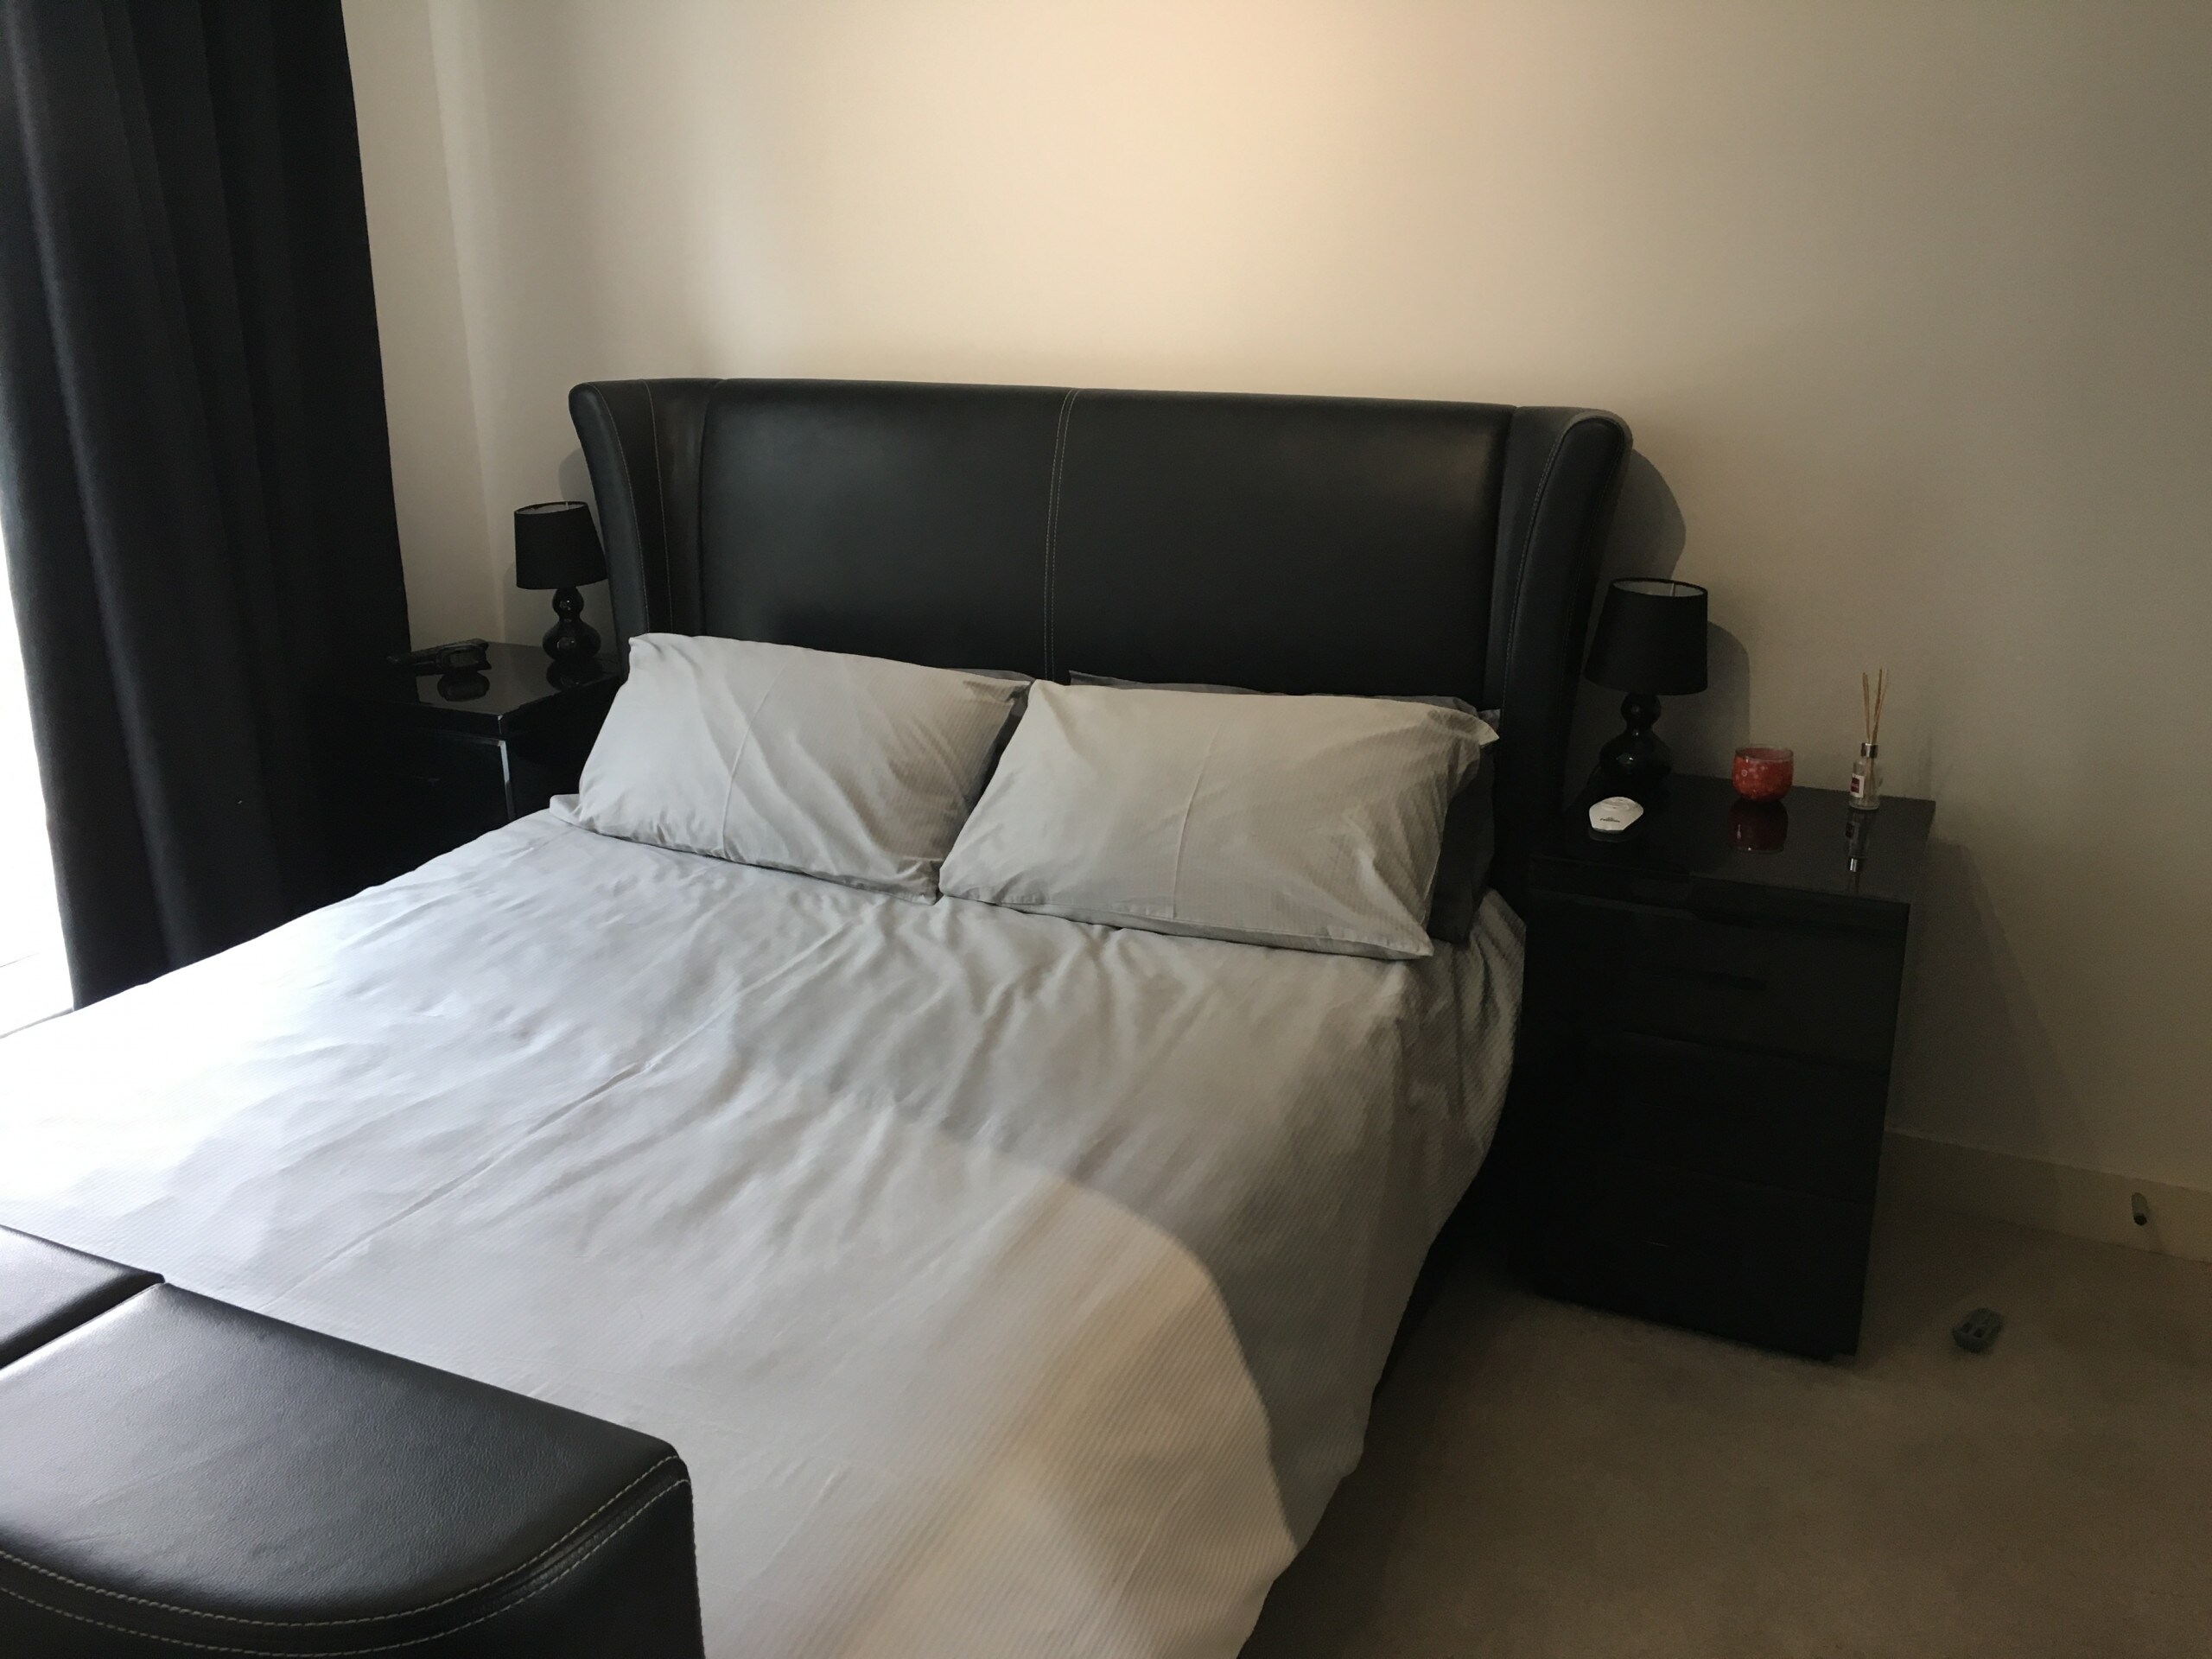 1 Bedroom, Ipswich Waterfront area, allocated parking space